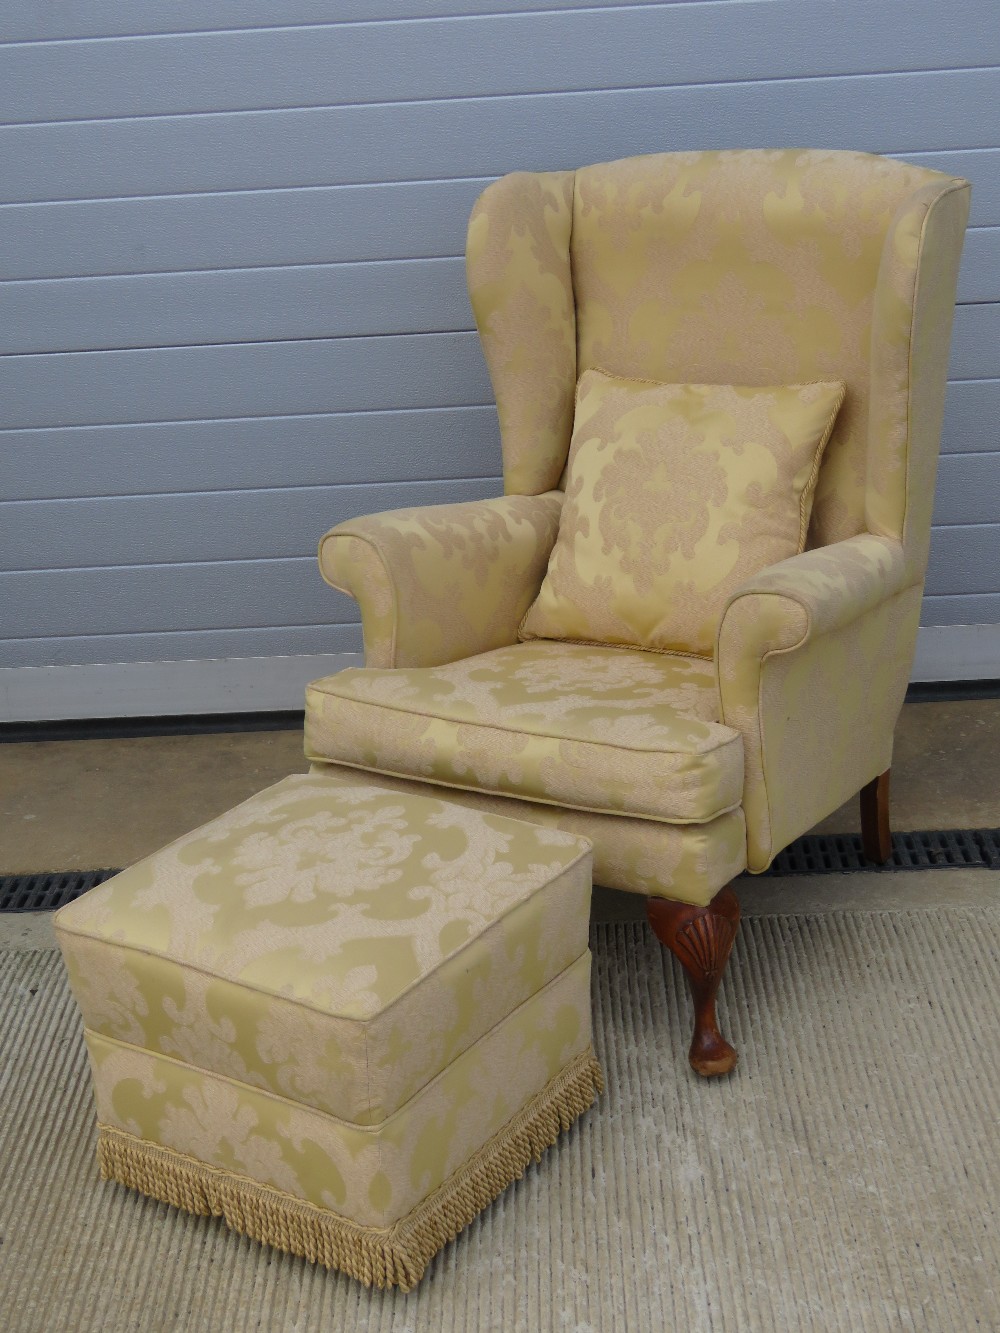 A single re-covered upholstered wingback chair in smart golden fabric with matching cushion and